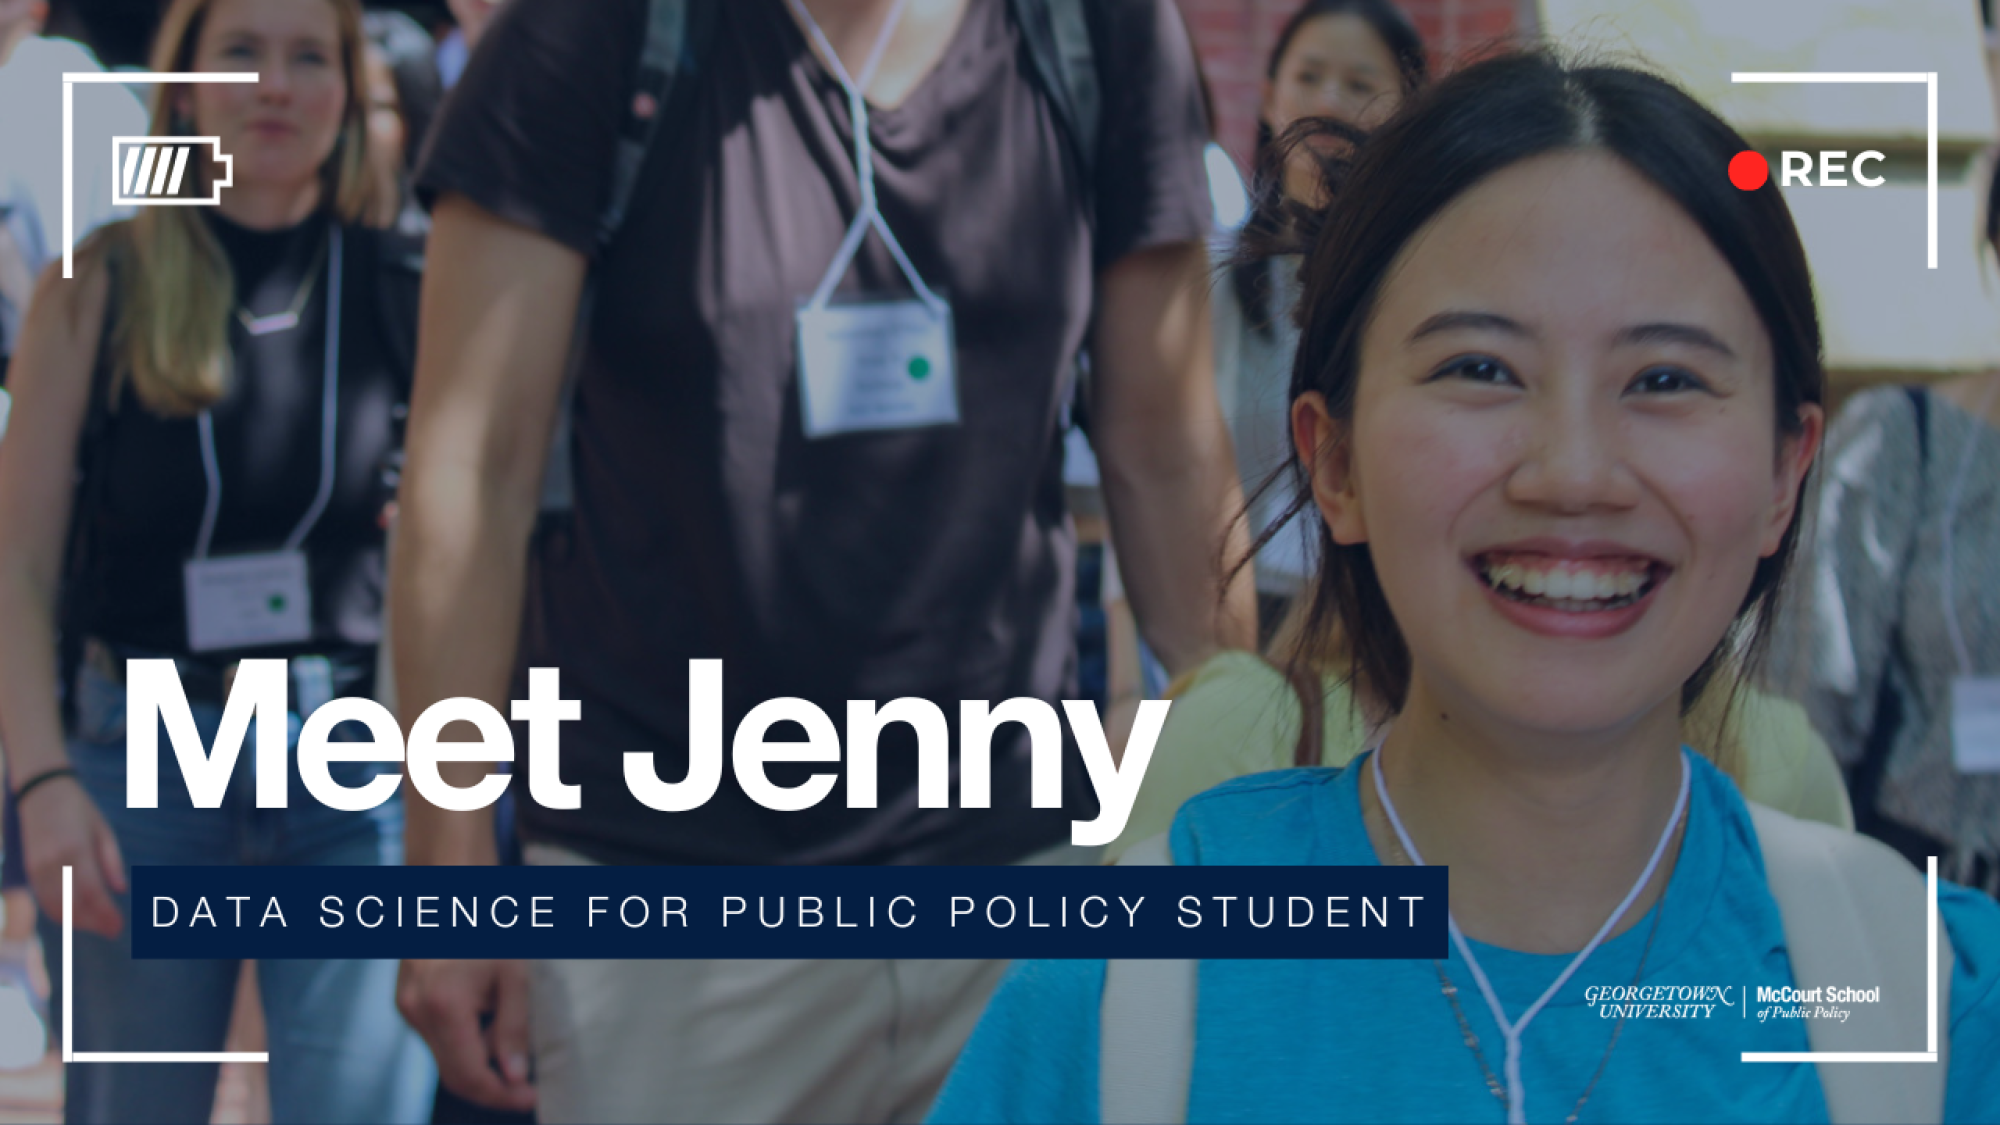 Woman smiling with students walking behind her. Text overlay reads Meet Jenny, Data Science Public for Policy Student